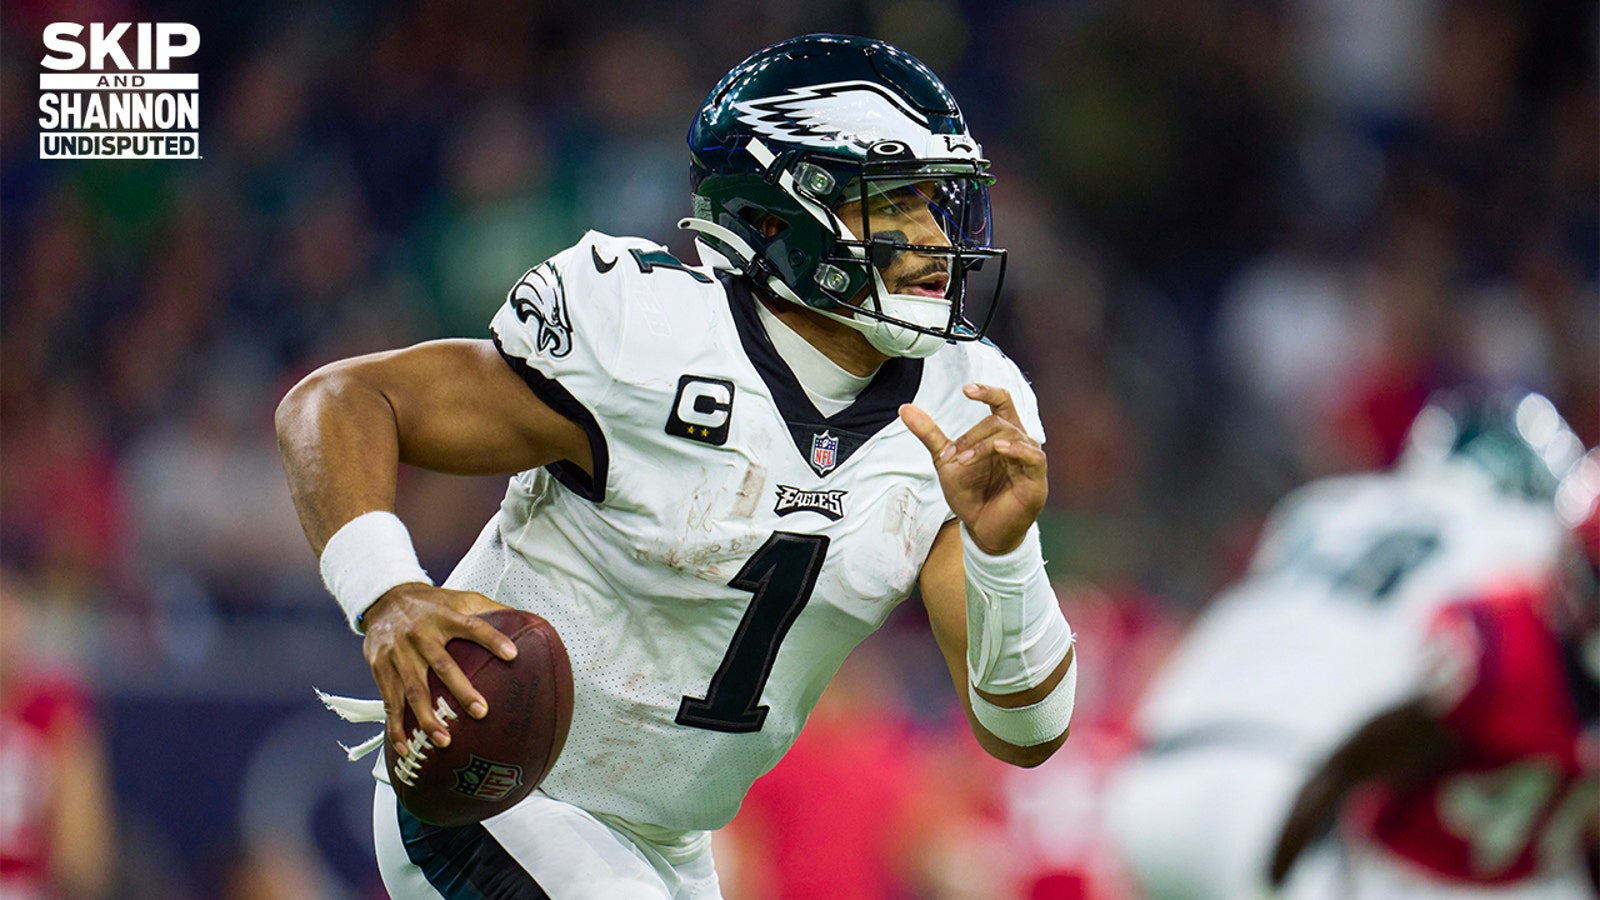 Does Jalen Hurts deserve MVP honors after leading the Eagles to an 8-0 start?